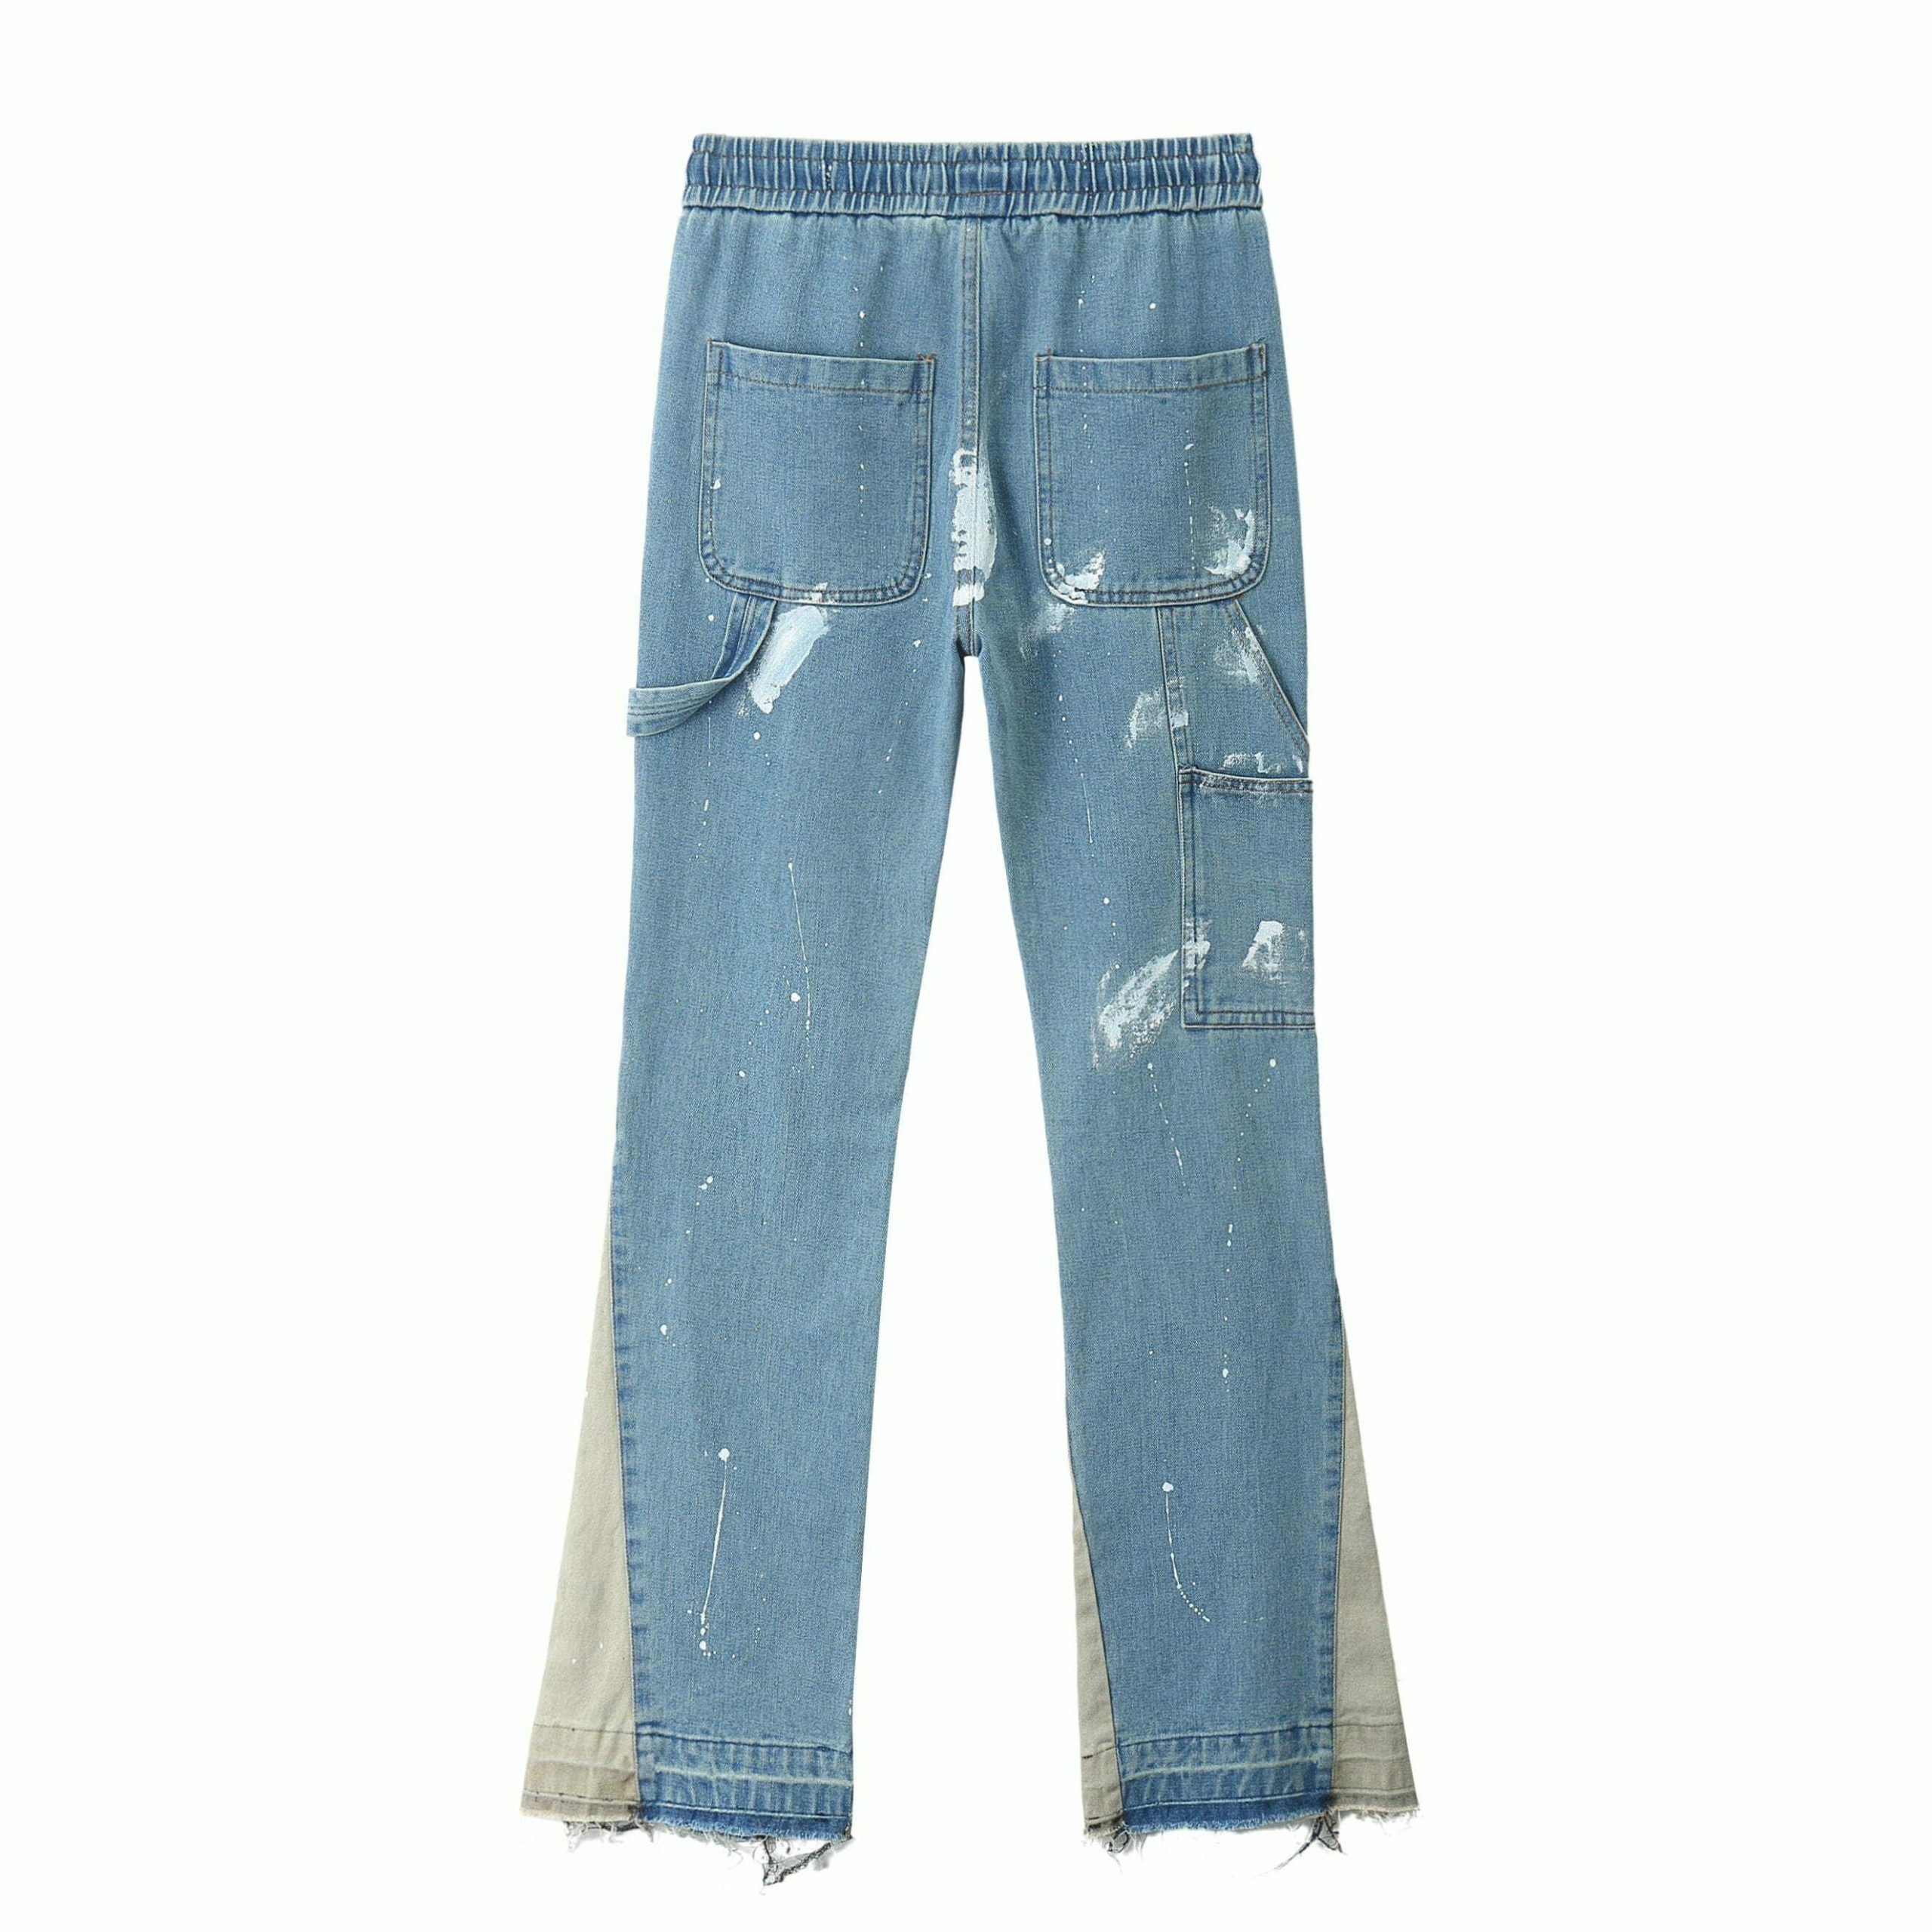 edgy ae 'spray paint' jeans   urban chic & trending style 4767